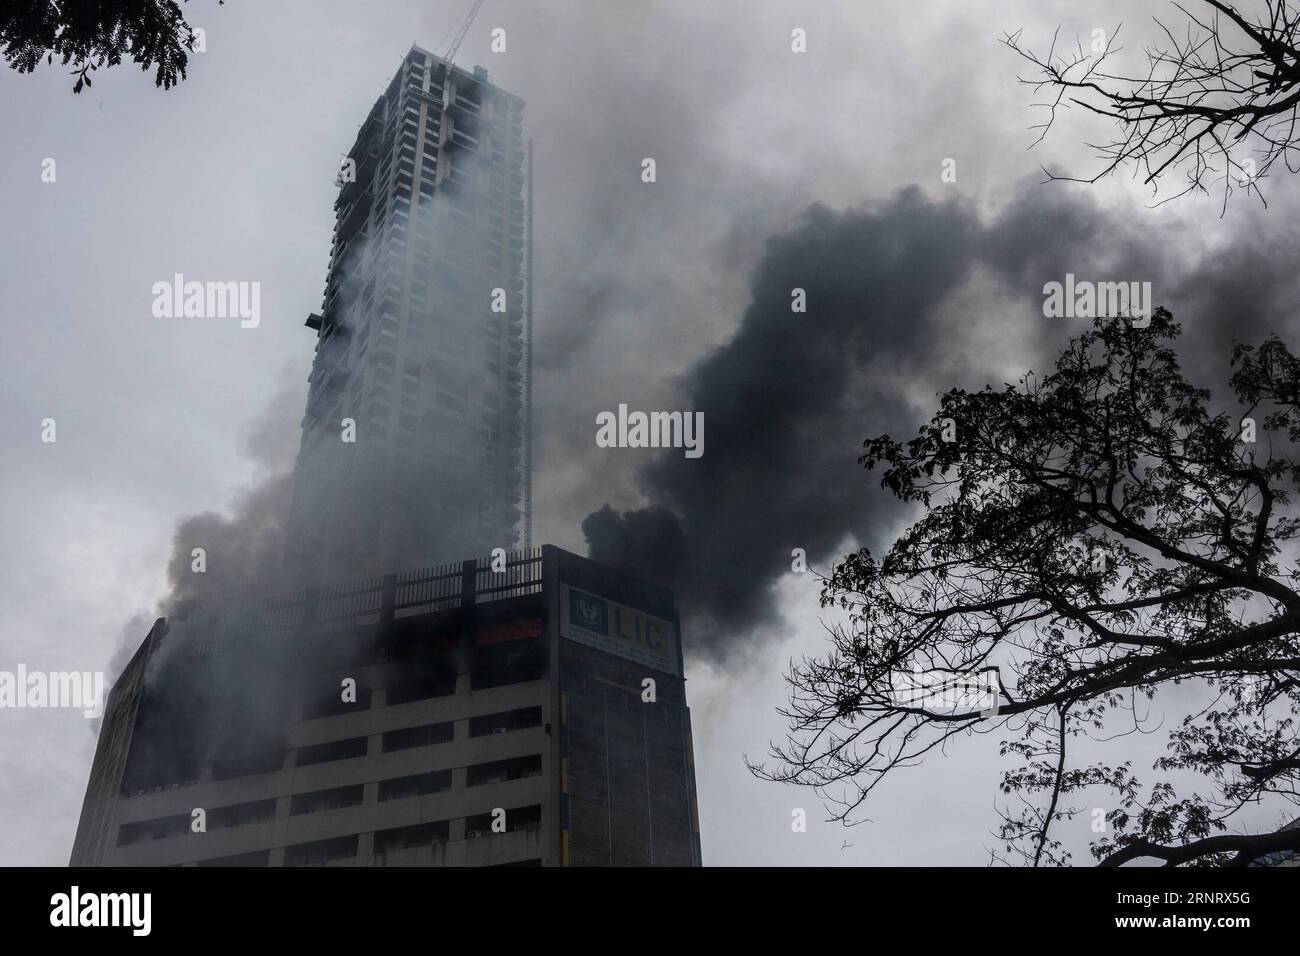 (171019) -- KOLKATA, Oct. 19, 2017 --Smoke rises from a commercial building where a fire brke out in central Kolkata, India, Oct. 19, 2017. A major fire broke out at a highrise office building in the eastern Indian city of Kolkata on Thursday, officials said. ) (srb) INDIA-KOLKATA-FIRE ACCIDENT TumpaxMondal PUBLICATIONxNOTxINxCHN Stock Photo